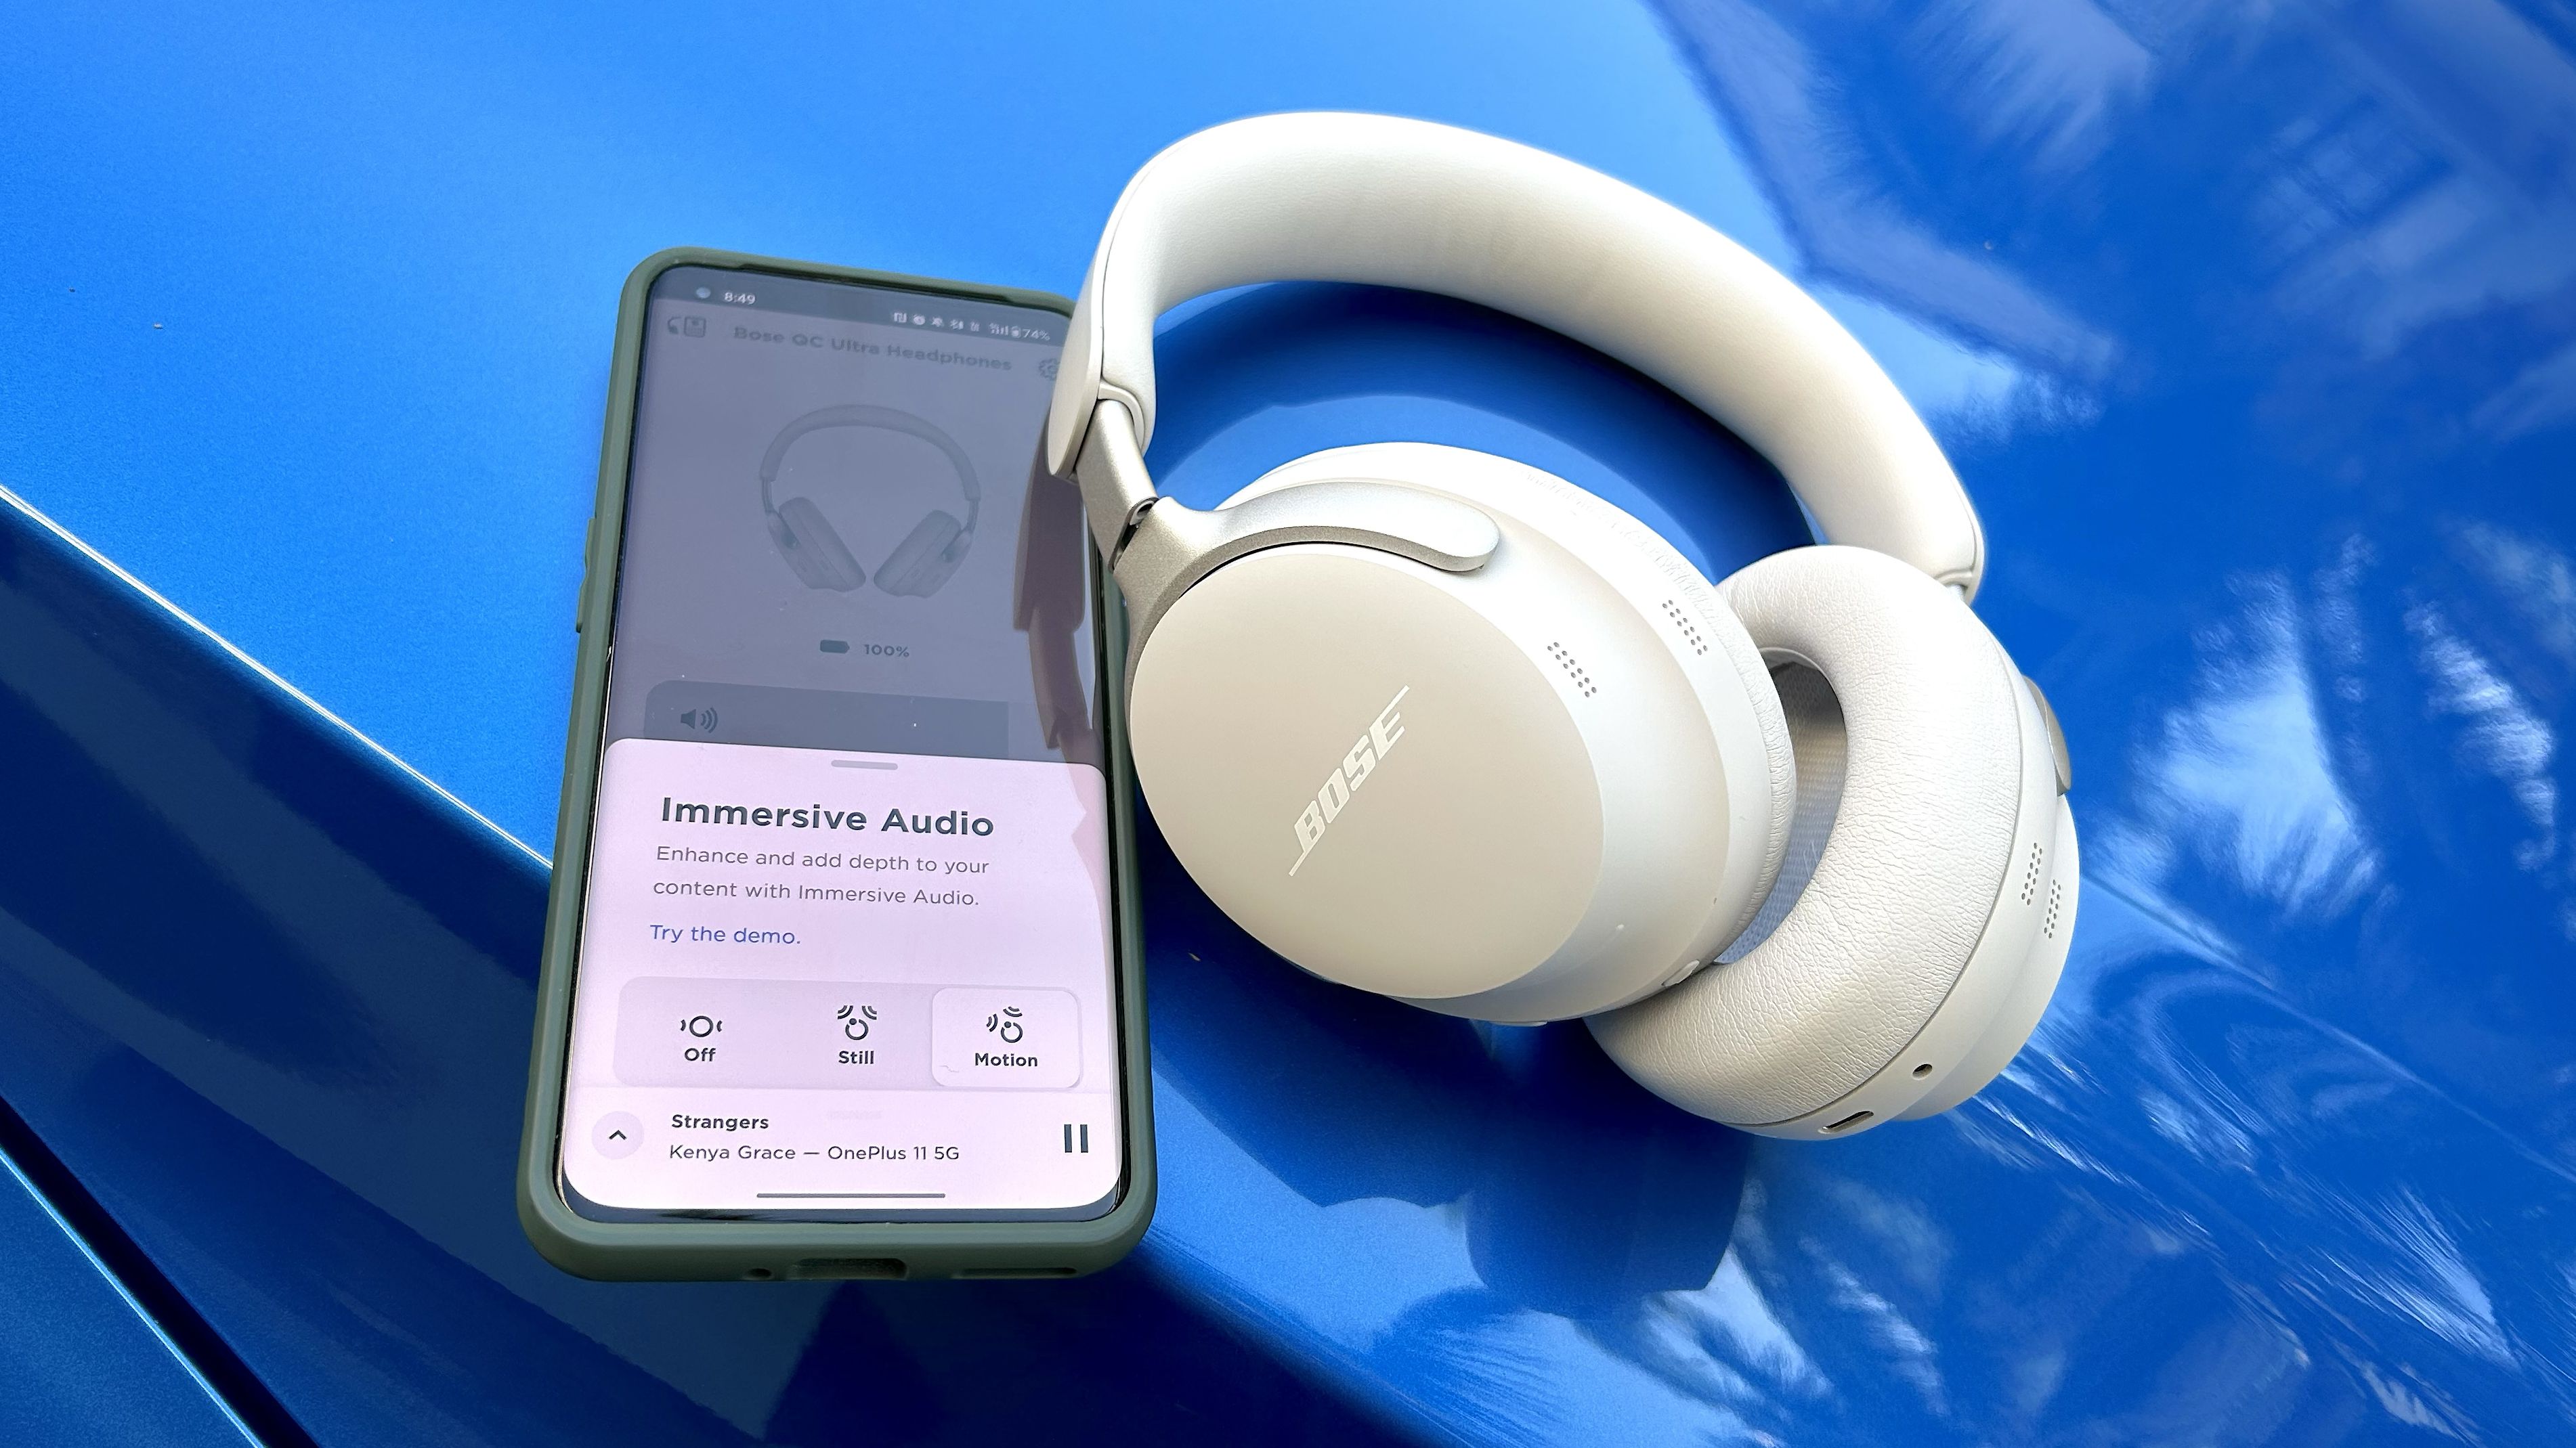 Bose announces new Ultra line of headphones with spatial audio